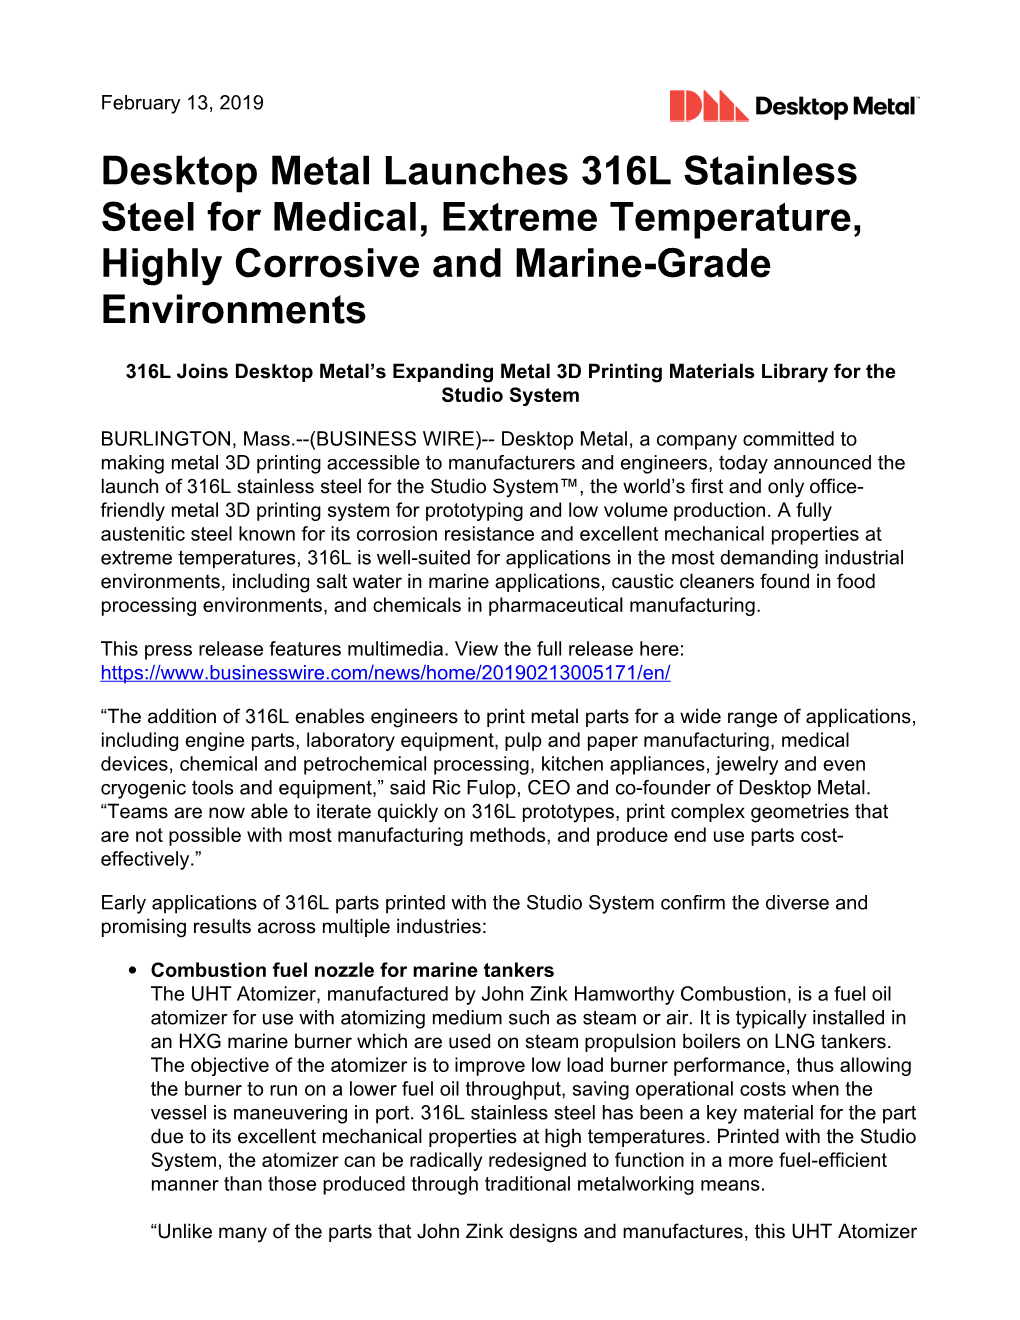 Desktop Metal Launches 316L Stainless Steel for Medical, Extreme Temperature, Highly Corrosive and Marine-Grade Environments